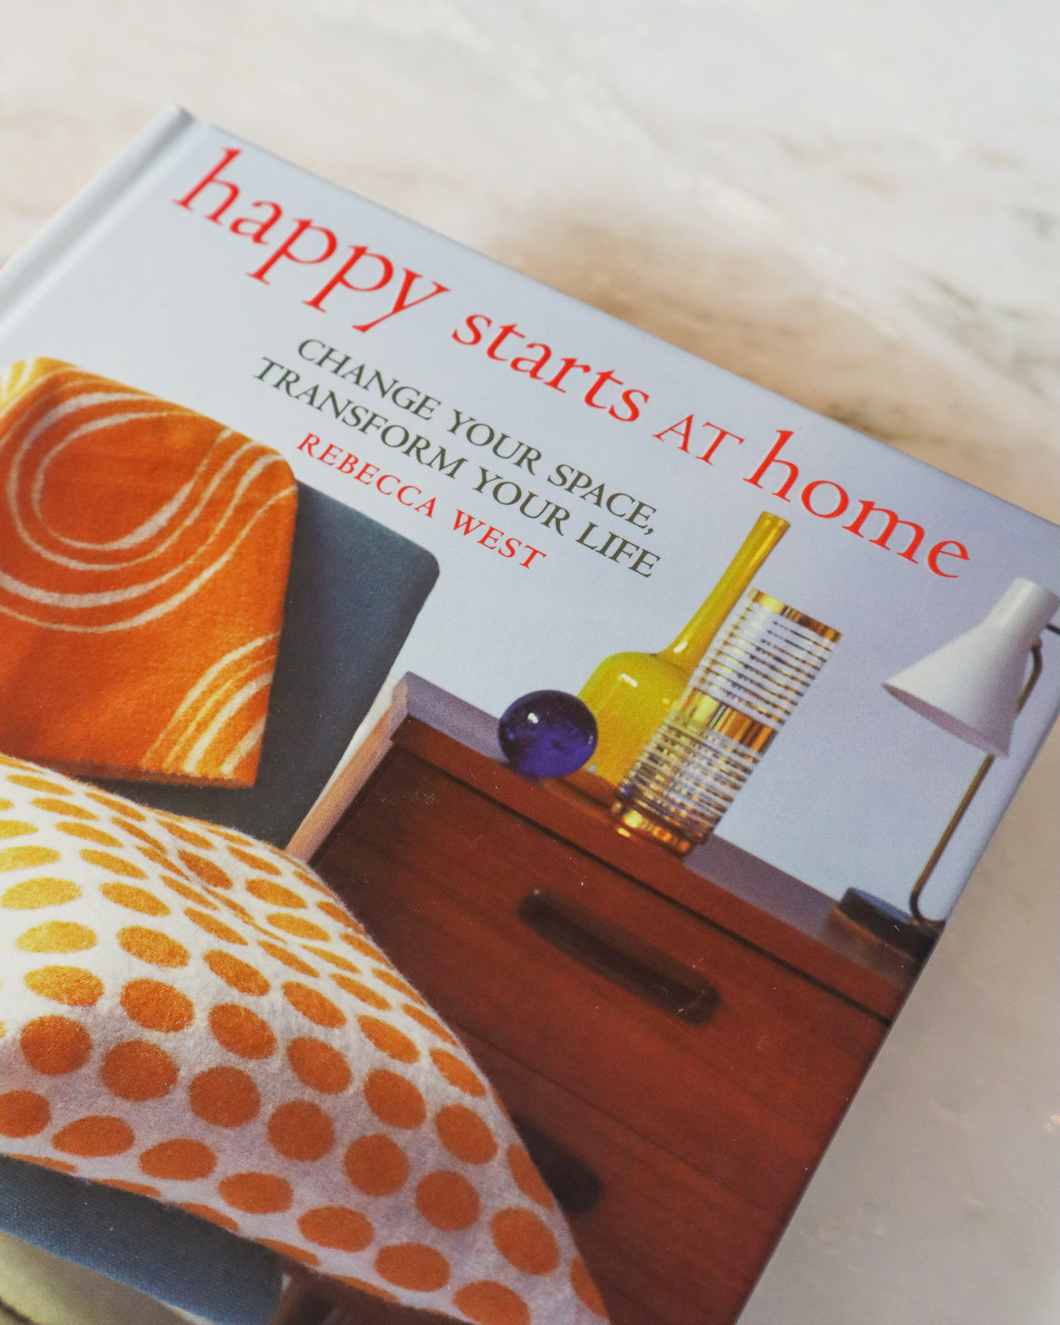 Happy Starts at Home, Book